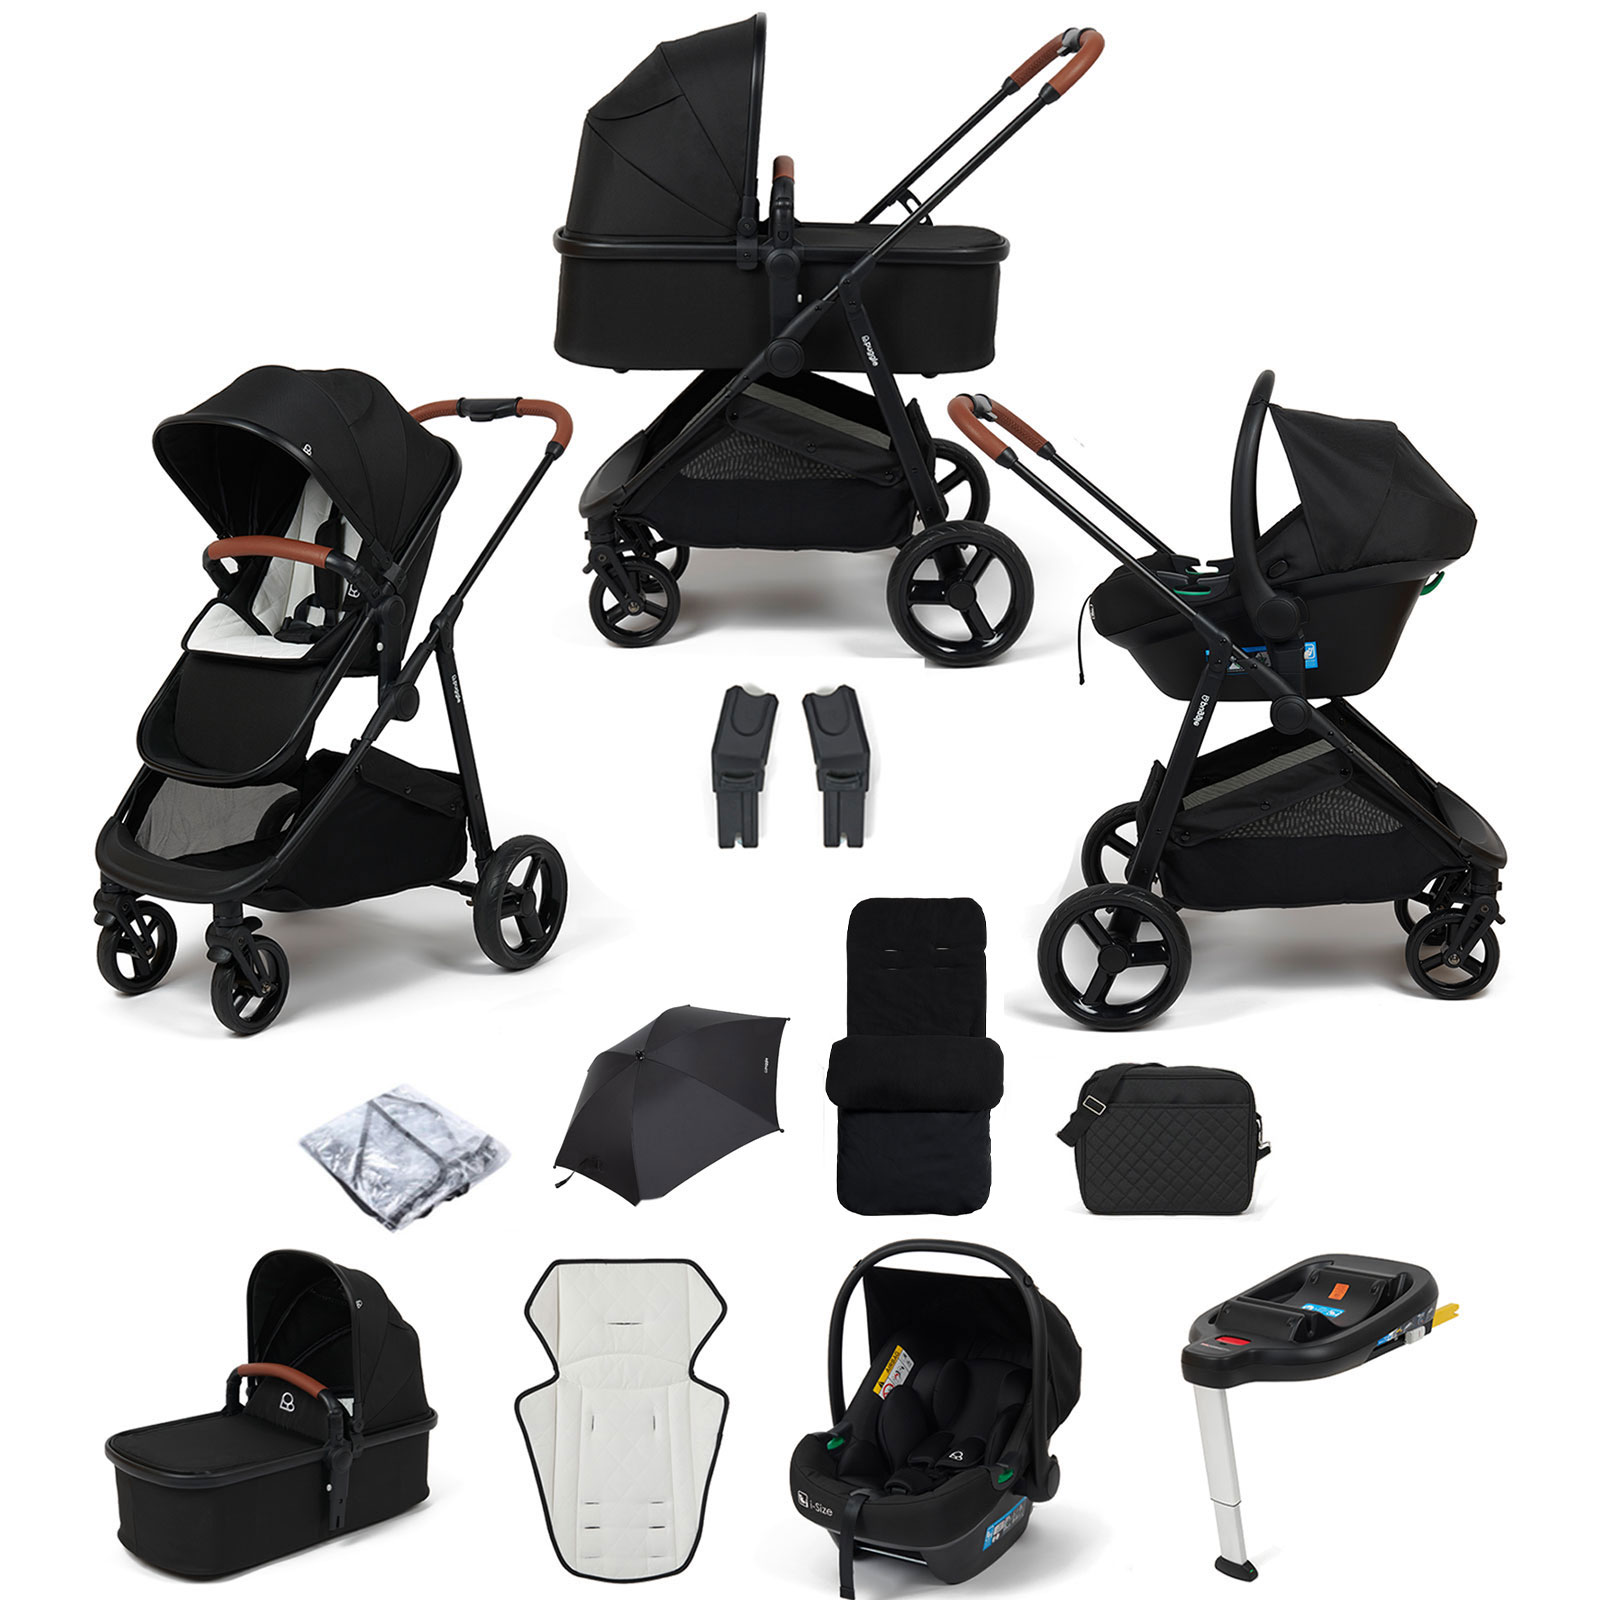 Puggle Monaco XT 3in1 i-Size Travel System with Changing Bag, Deluxe Footmuff, Parasol & ISOFIX Base - Storm Black